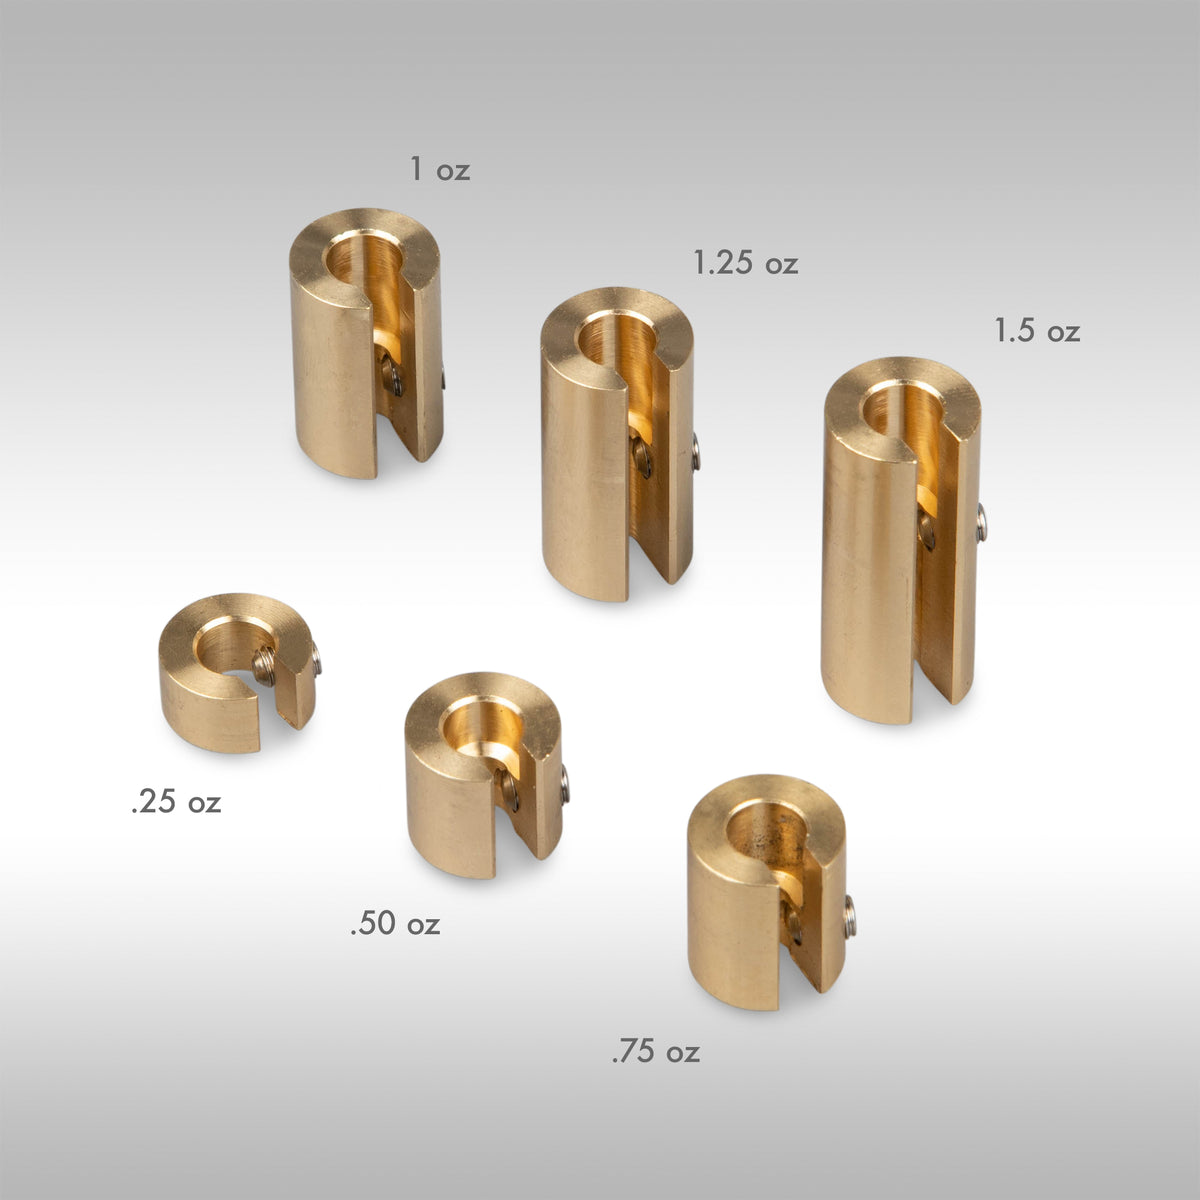 No-Mar wheel weights for balancing your motorcycle wheels. Machined brass weights are designed to lock onto the spokes with a set screw letting you get the perfect balance for your wheels. No Mar motorcycle wheel weights.